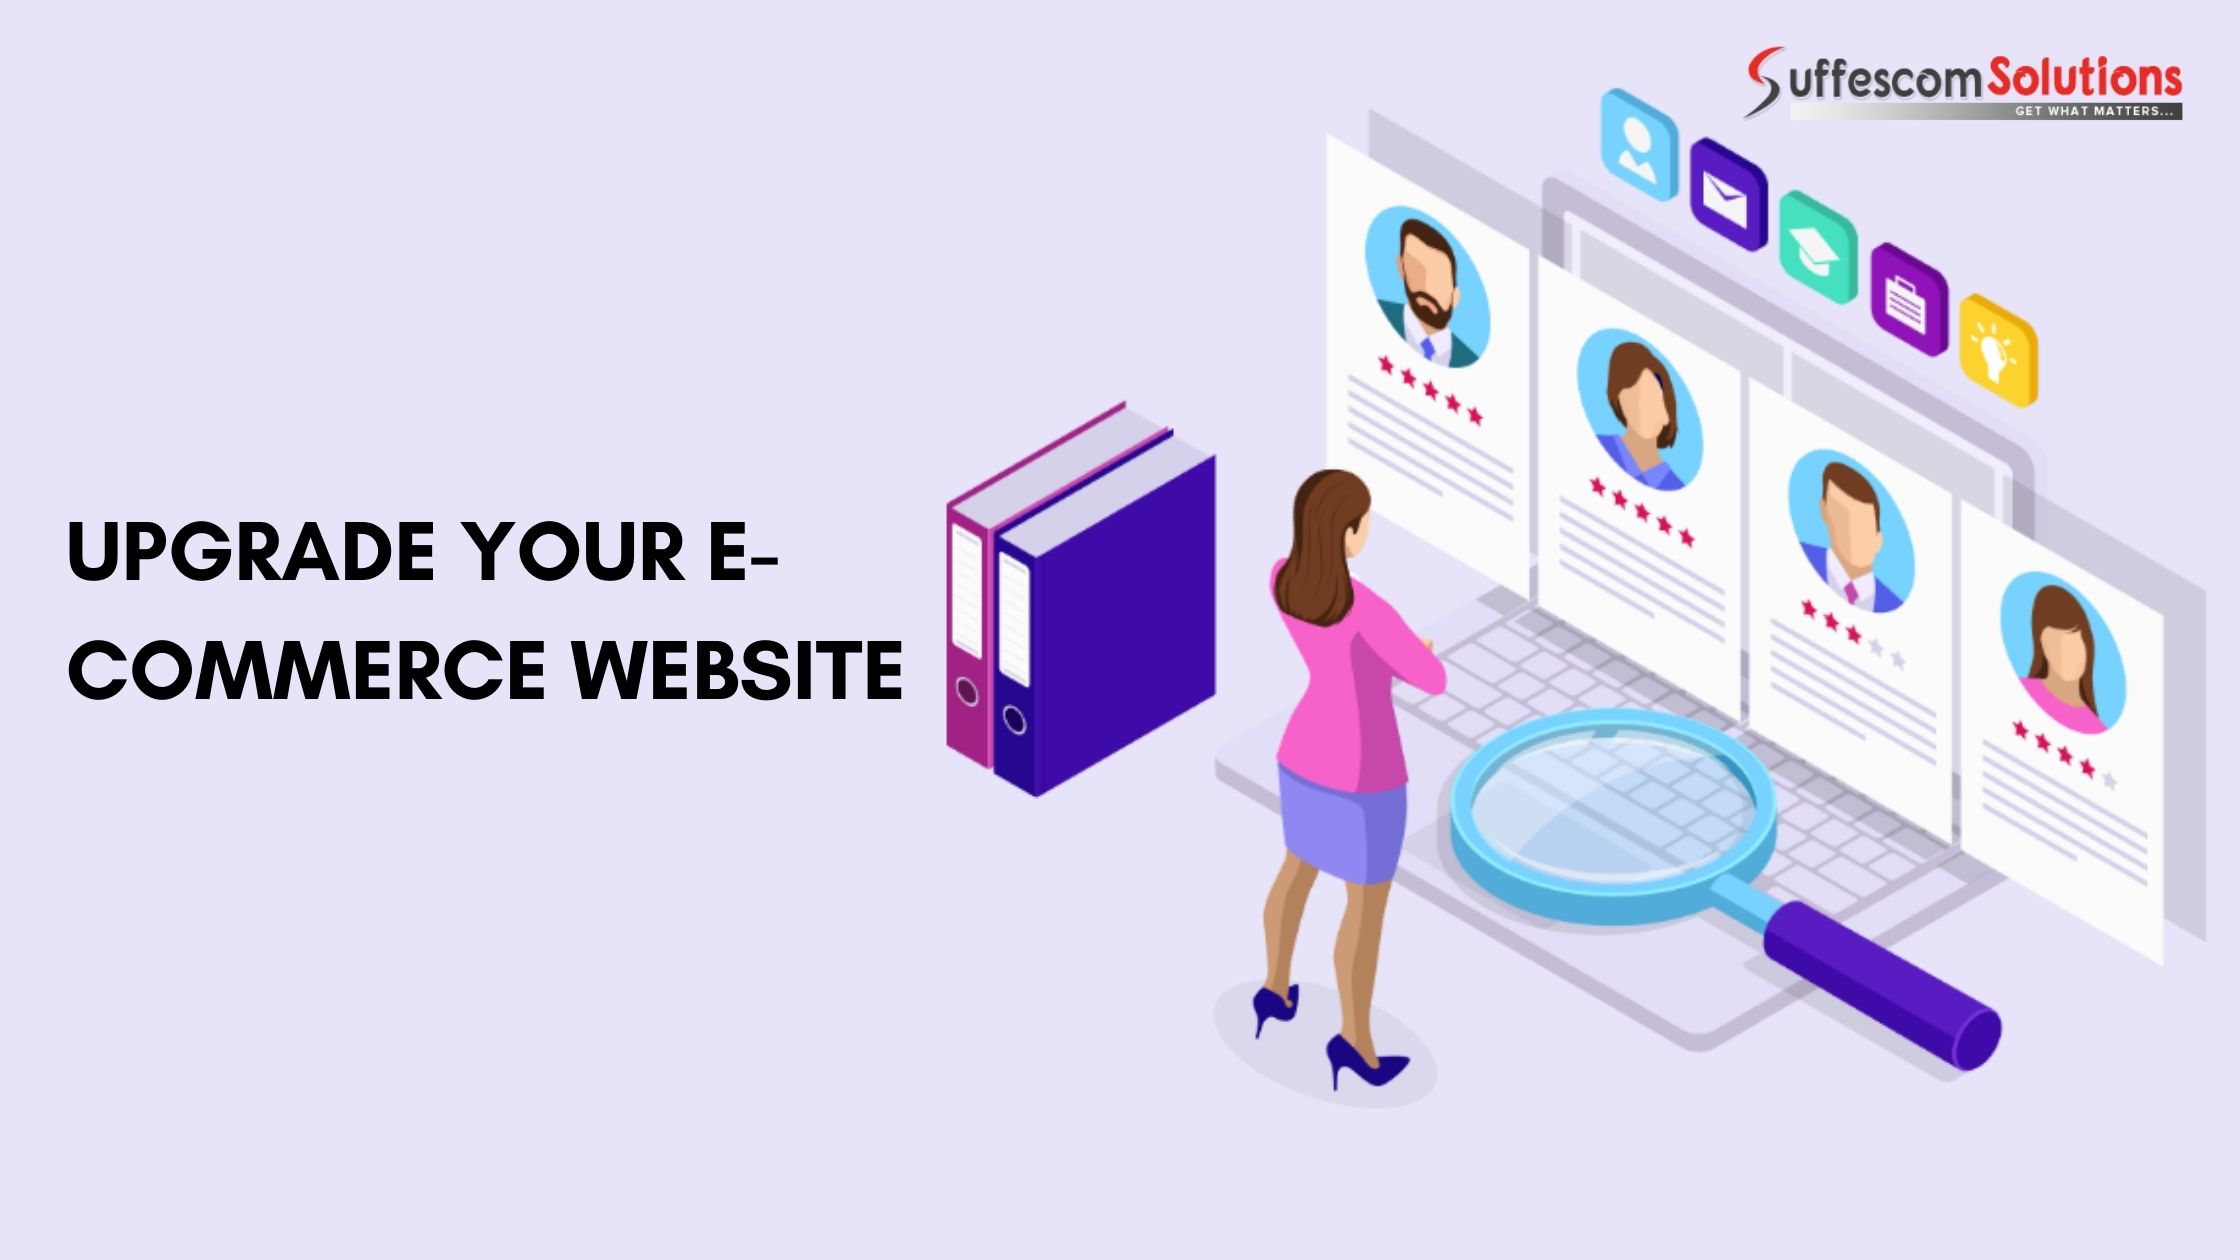 Signs to Upgrade Your E-Commerce Website